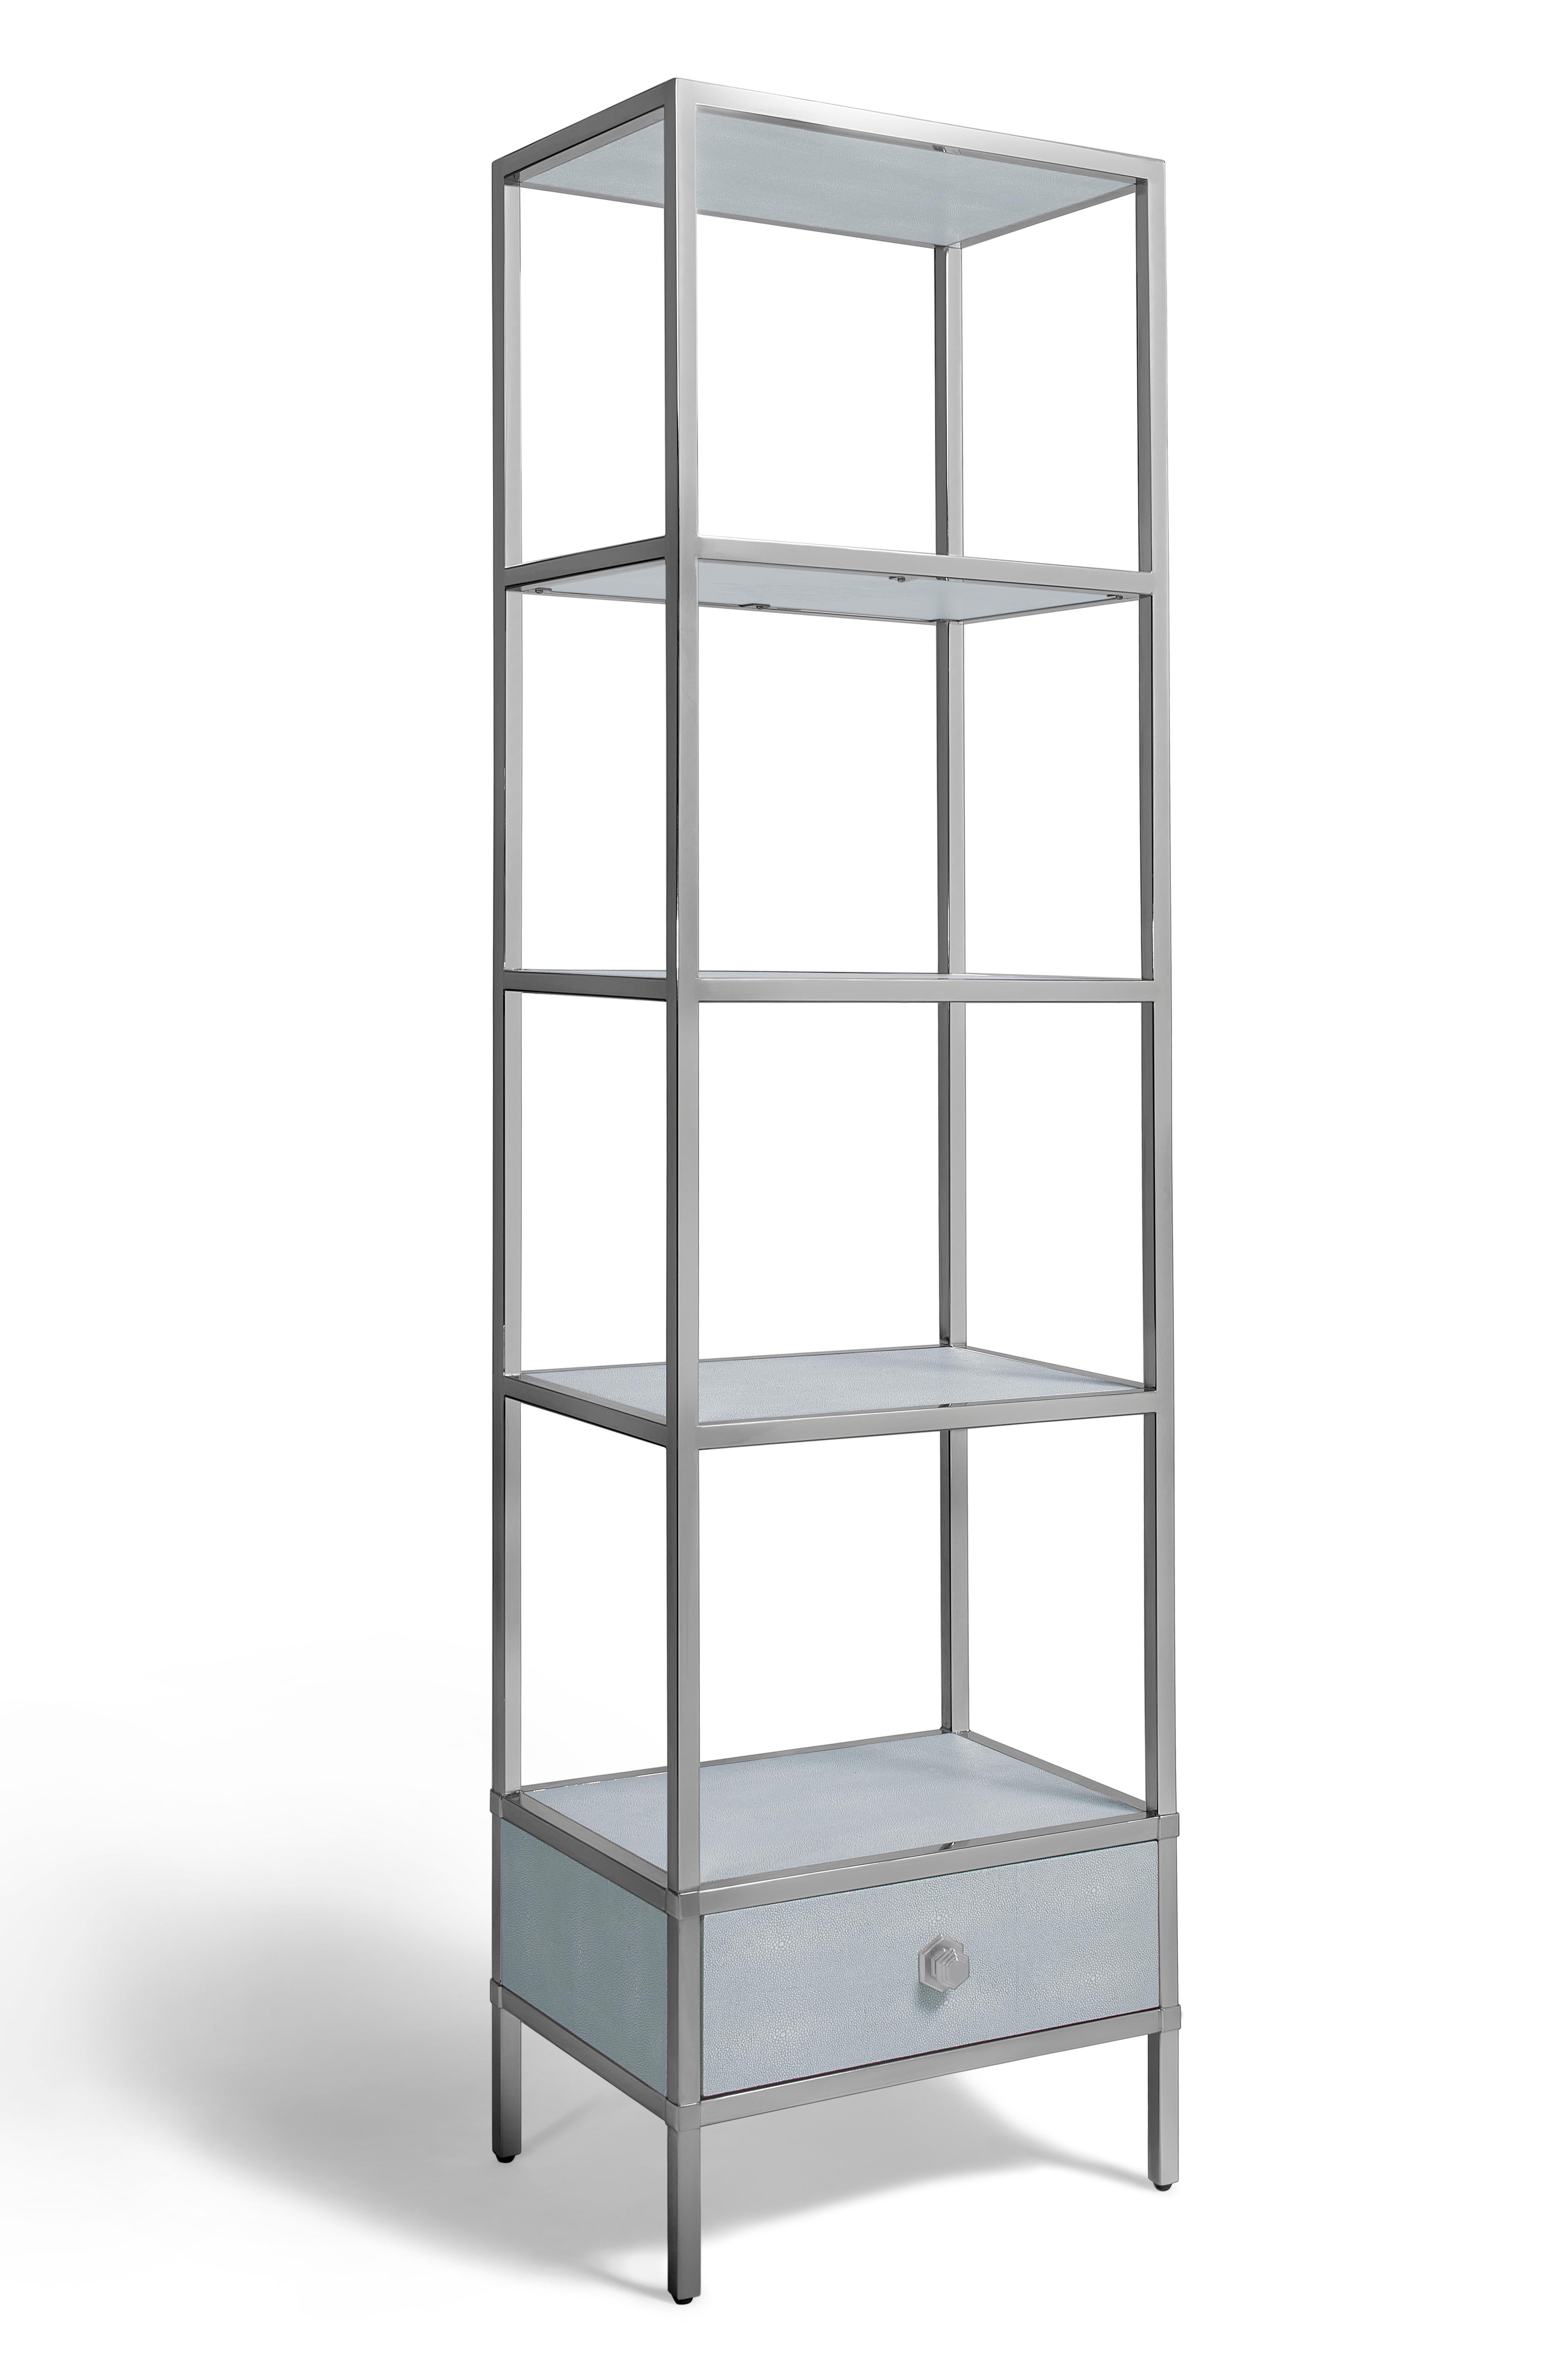 The single standing shelf was custom made to the clients specifications which were as follows. 

A polished stainless steel shelf frame with four shelfs consisting of shagreen inserts into the frame and a shagreen draw at the base with an Oak